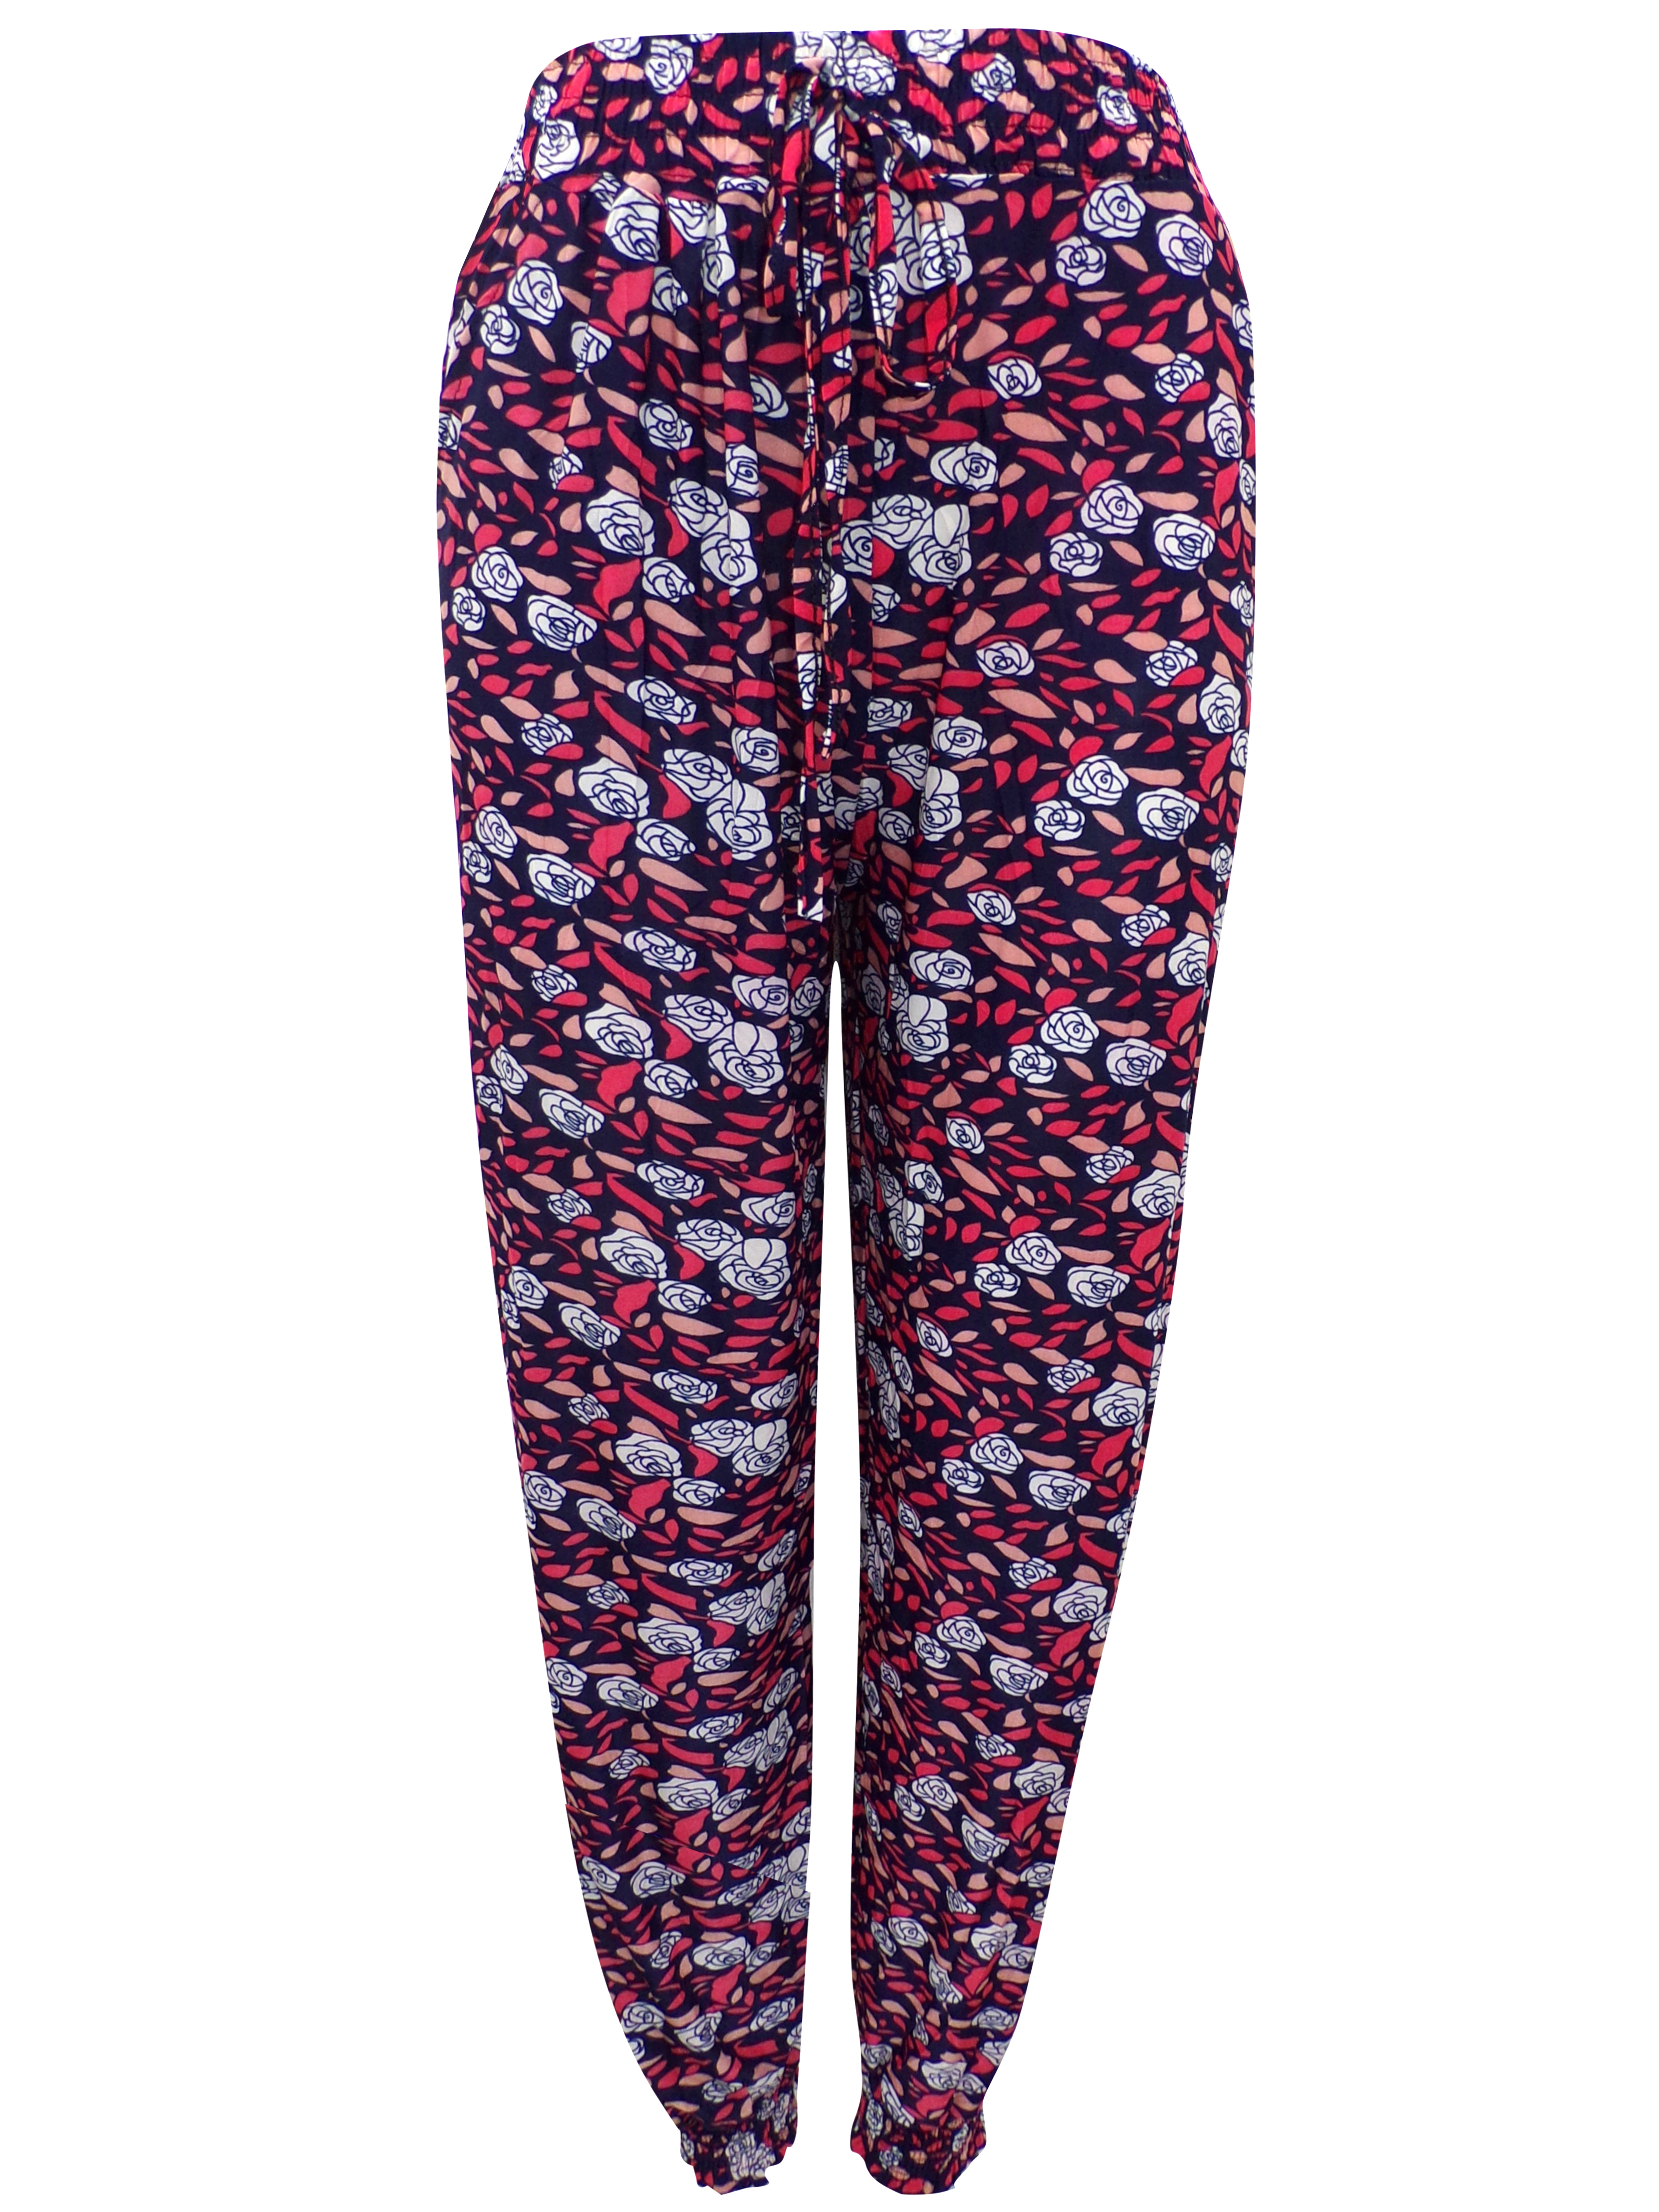 Luxestar - - Luxestar PEACH Pull On Printed Harem Trousers - Size 12/14 ...